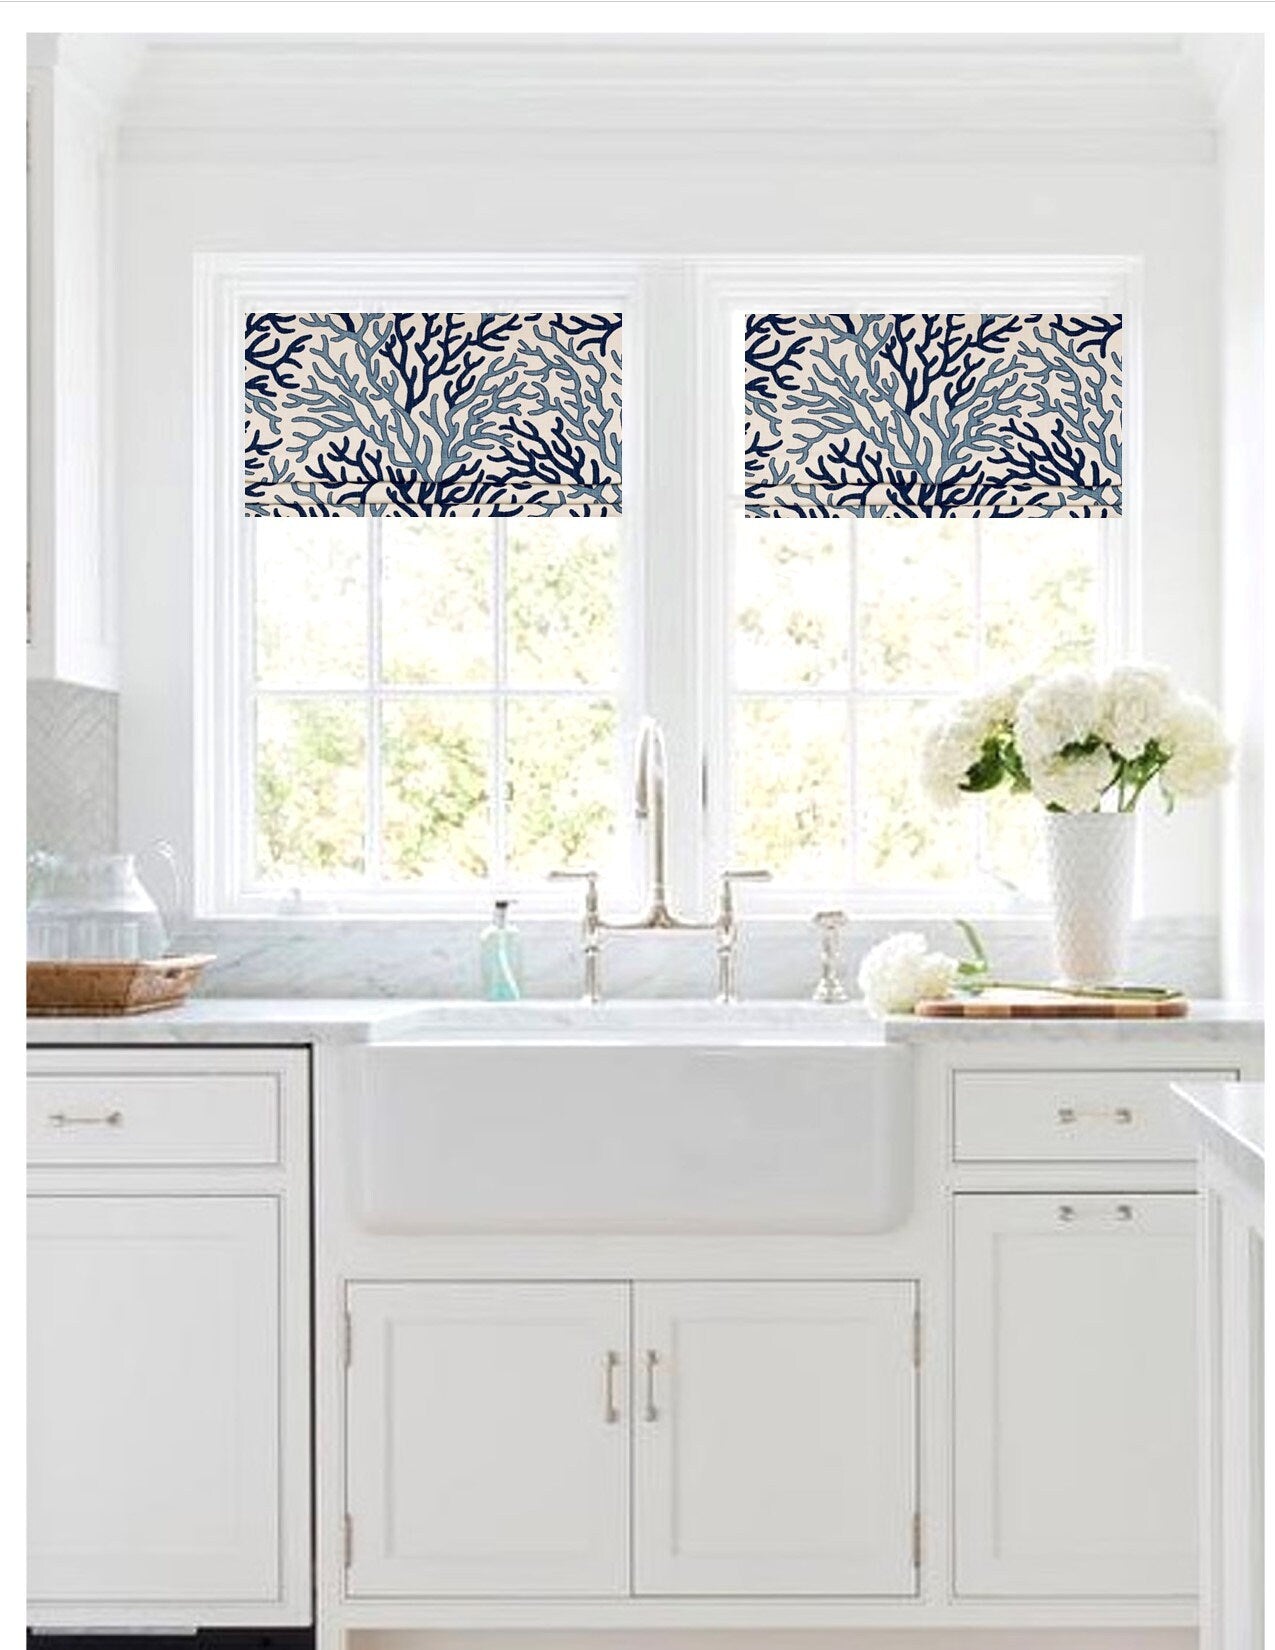 Faux Roman Shade Valance in Blue Coral Reef Print, Custom Made on Luxe Linen Cotton Fabric, Fully Lined Custom Window Treatmets, Curtains